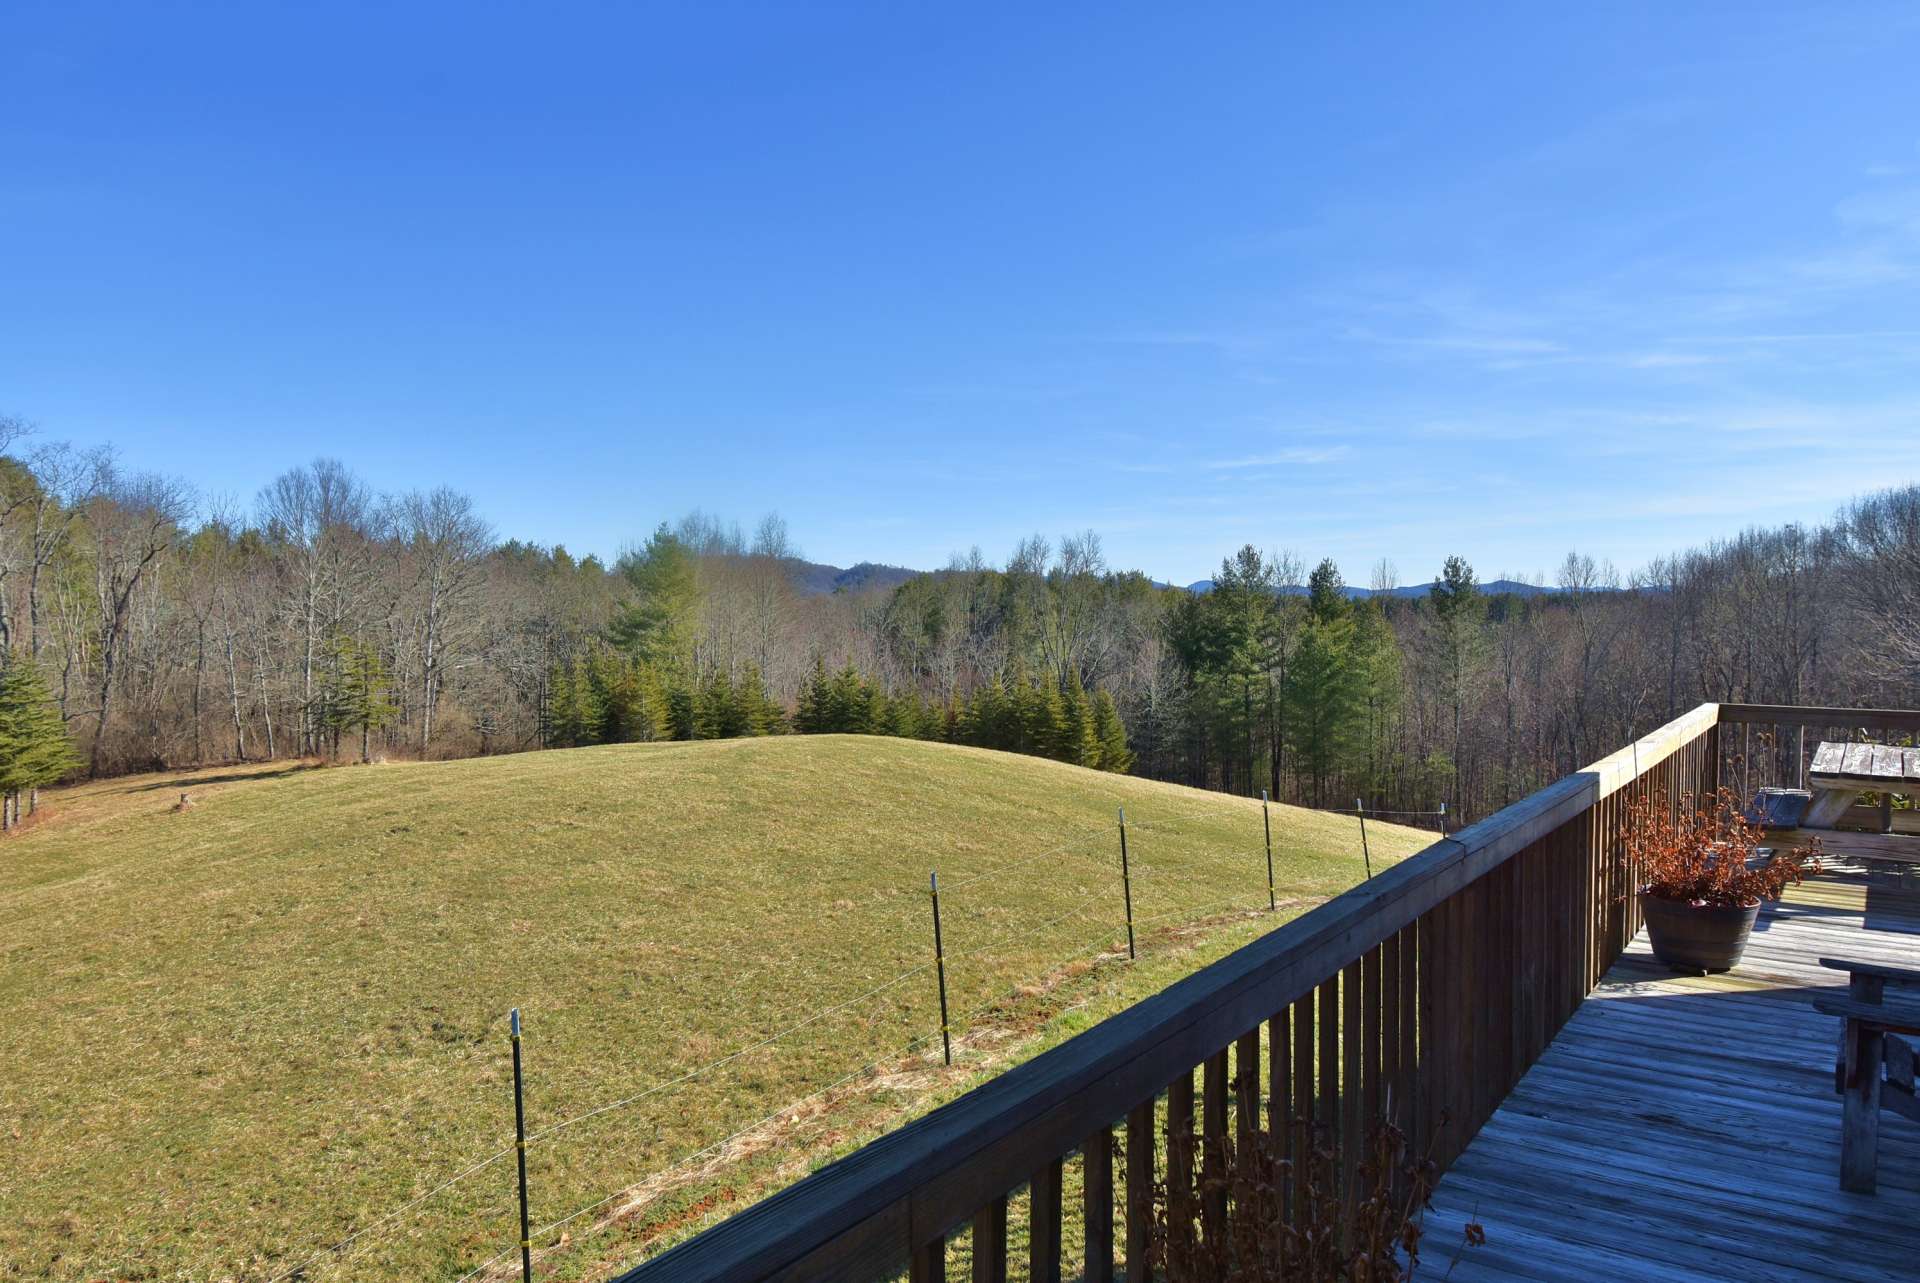 Located on a country road in the Grassy Creek area of Northeastern Ashe County, this secluded property is just a hop and a skip away from the historic New River and convenient to Jefferson, West Jefferson, and the Grayson Highlands areas.